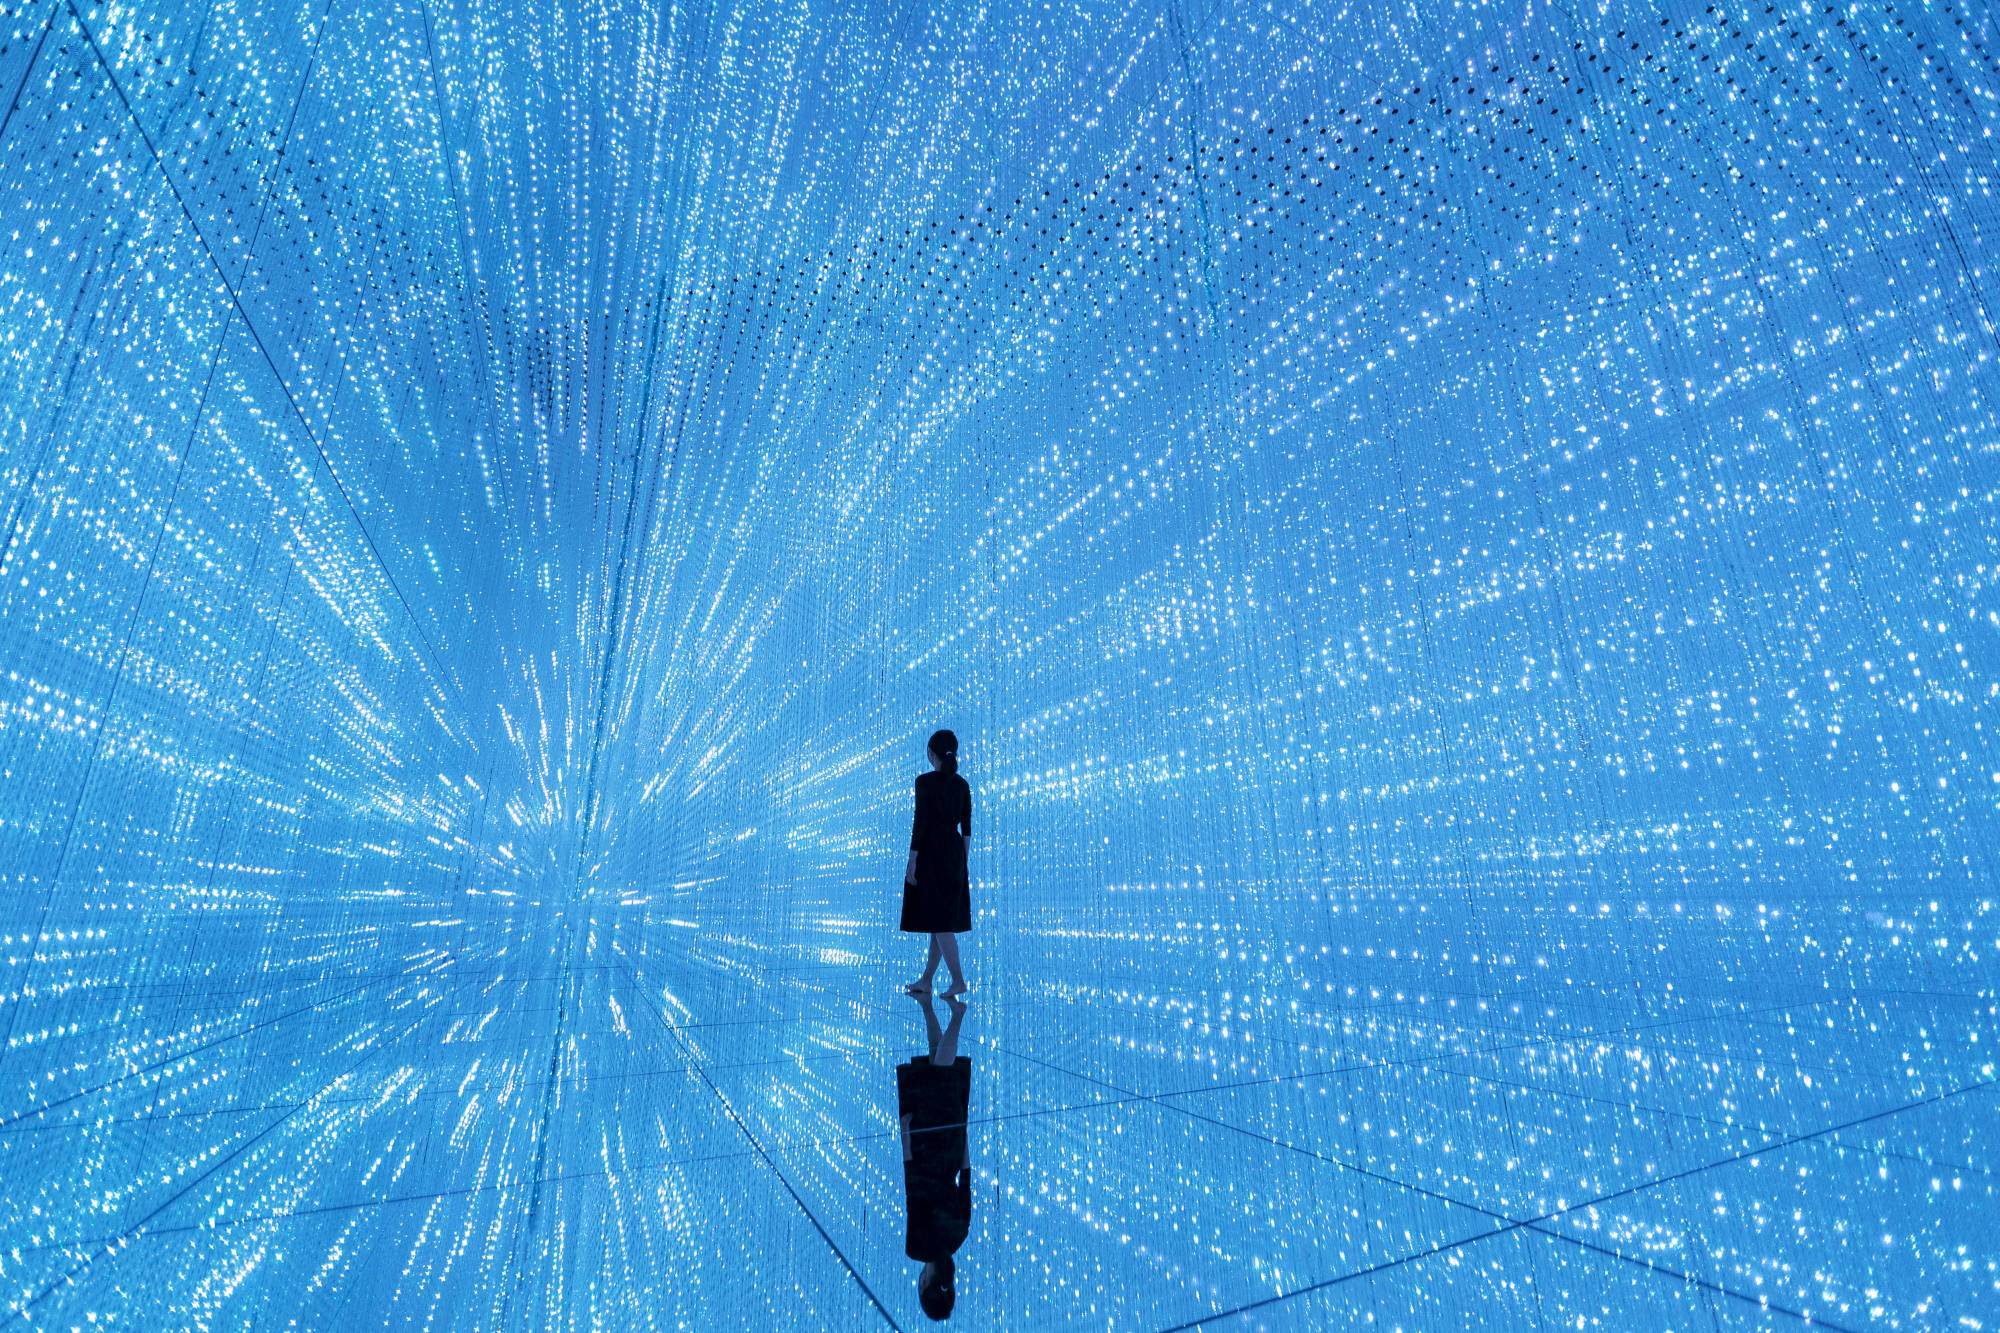 Experiential Art Center Superblue to Open with teamLAB, James Turrell –